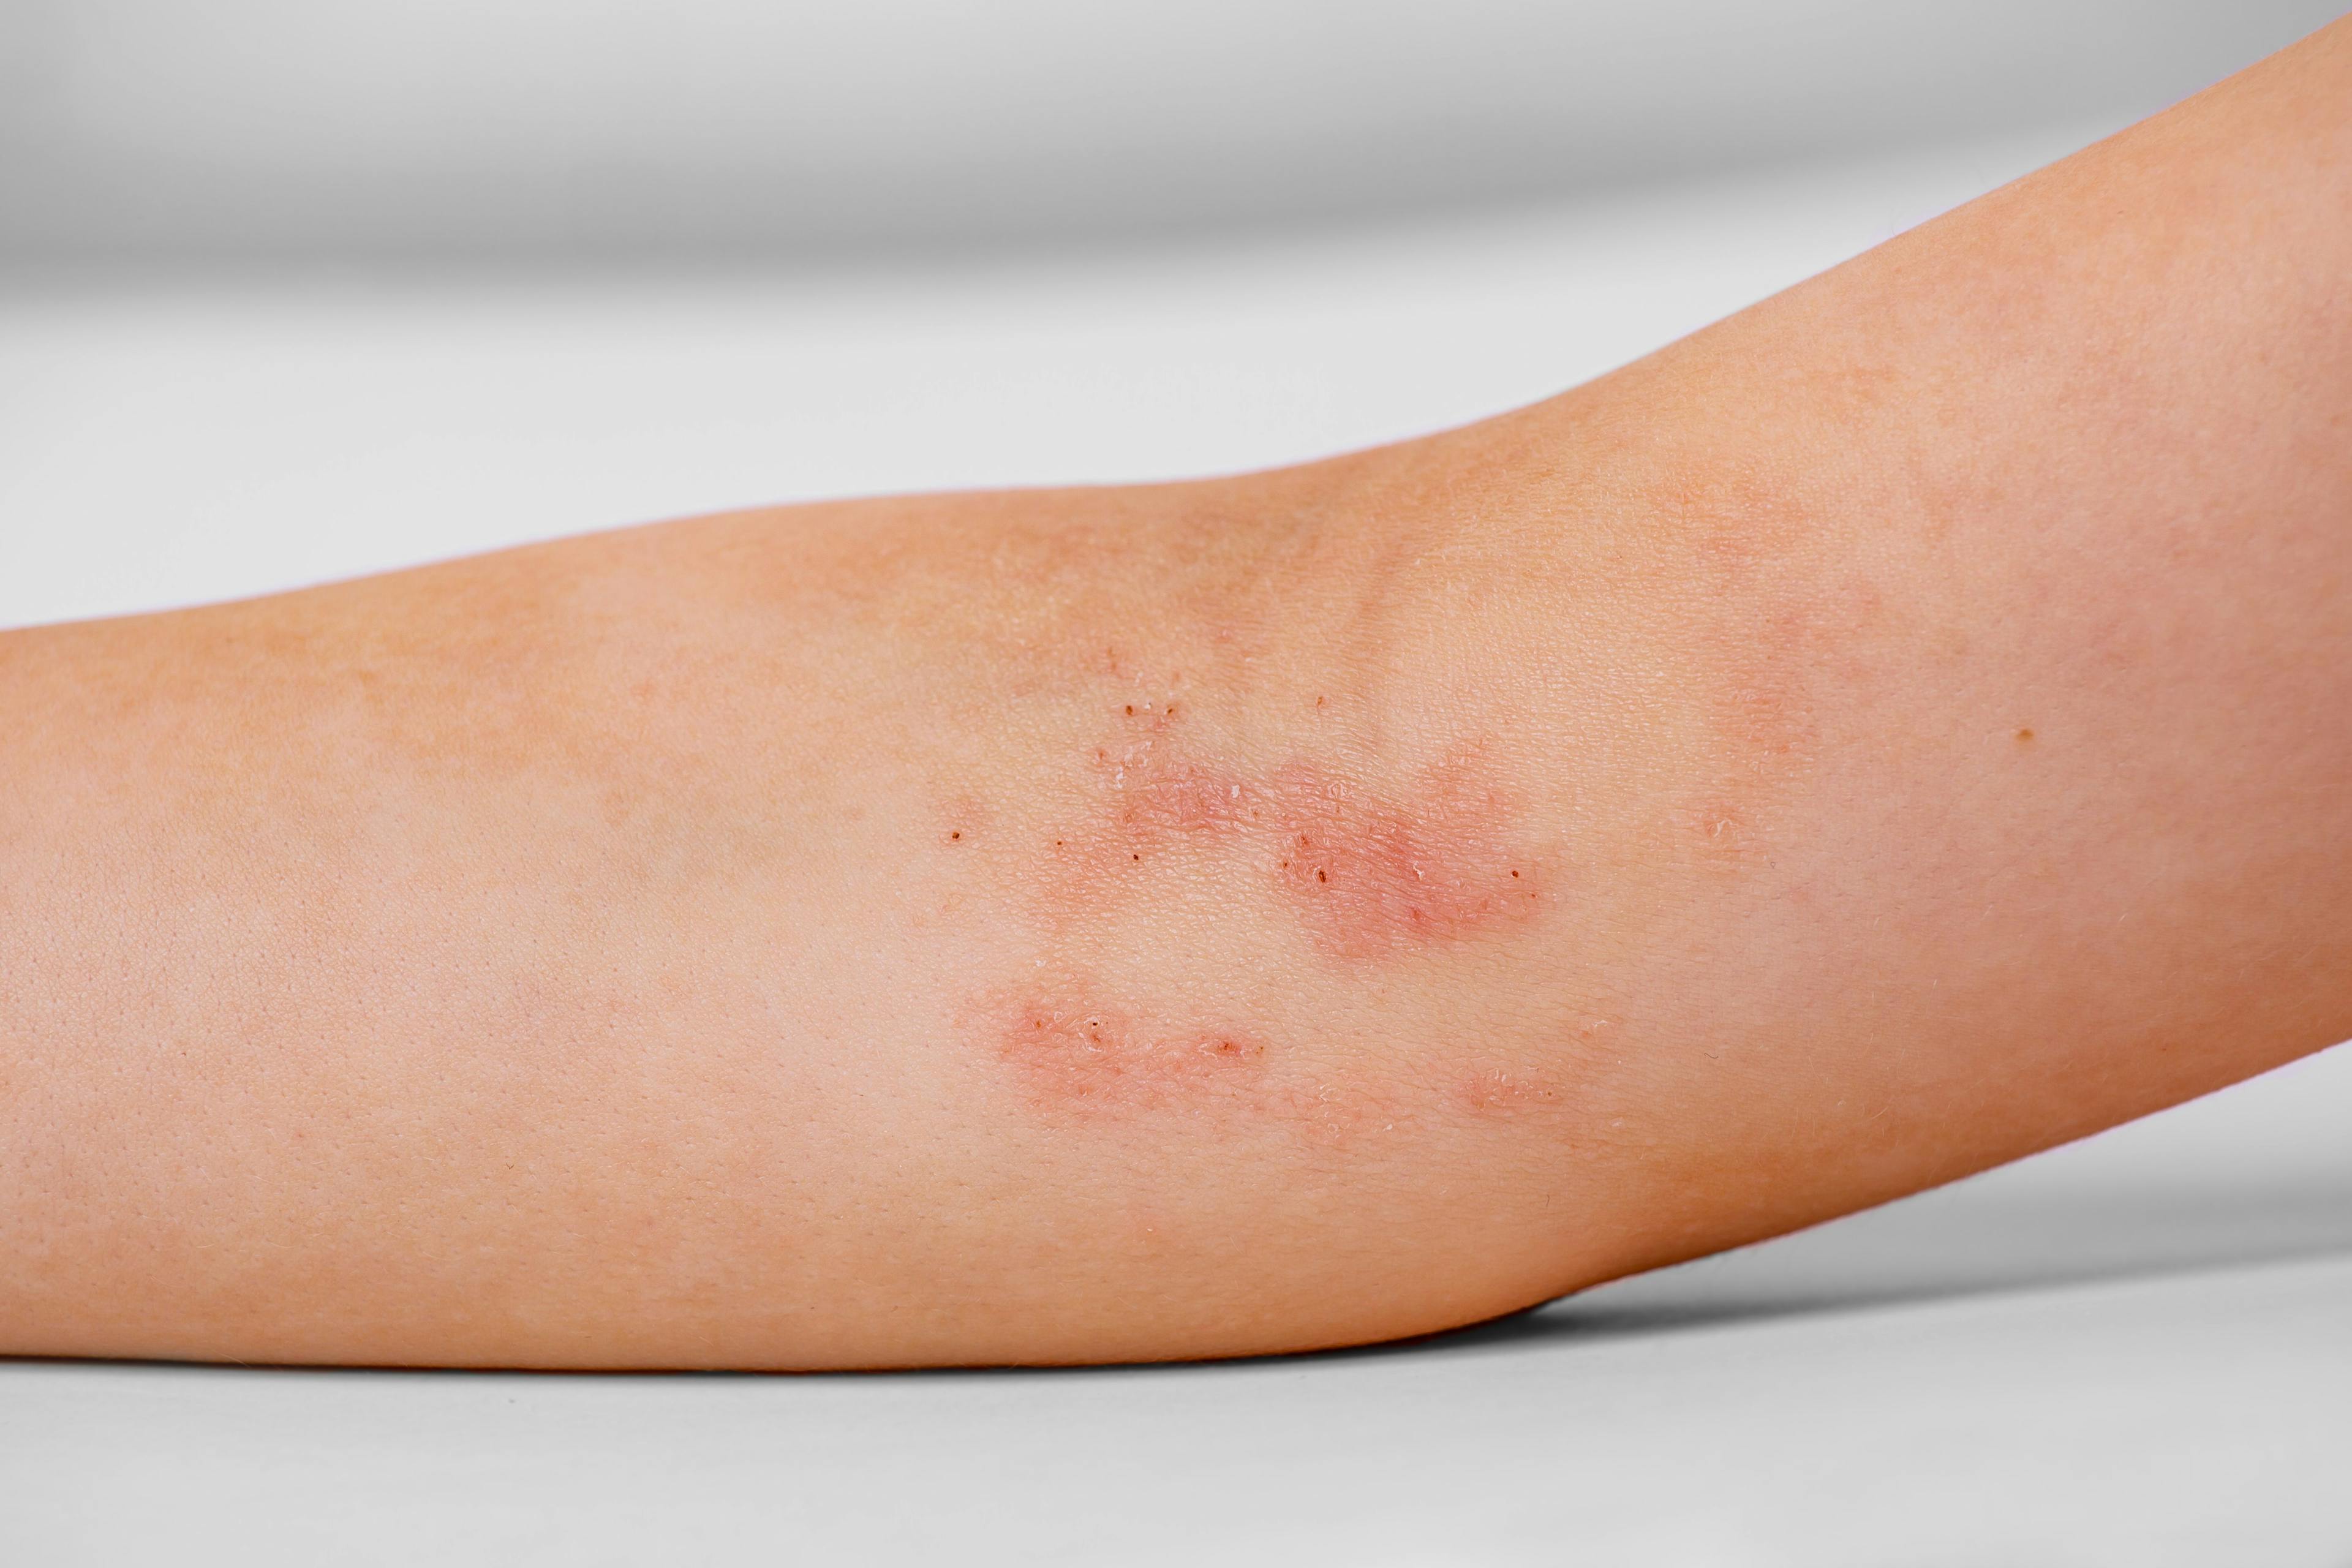 Atopic Dermatitis: A Personalized Approach May Improve Outcomes